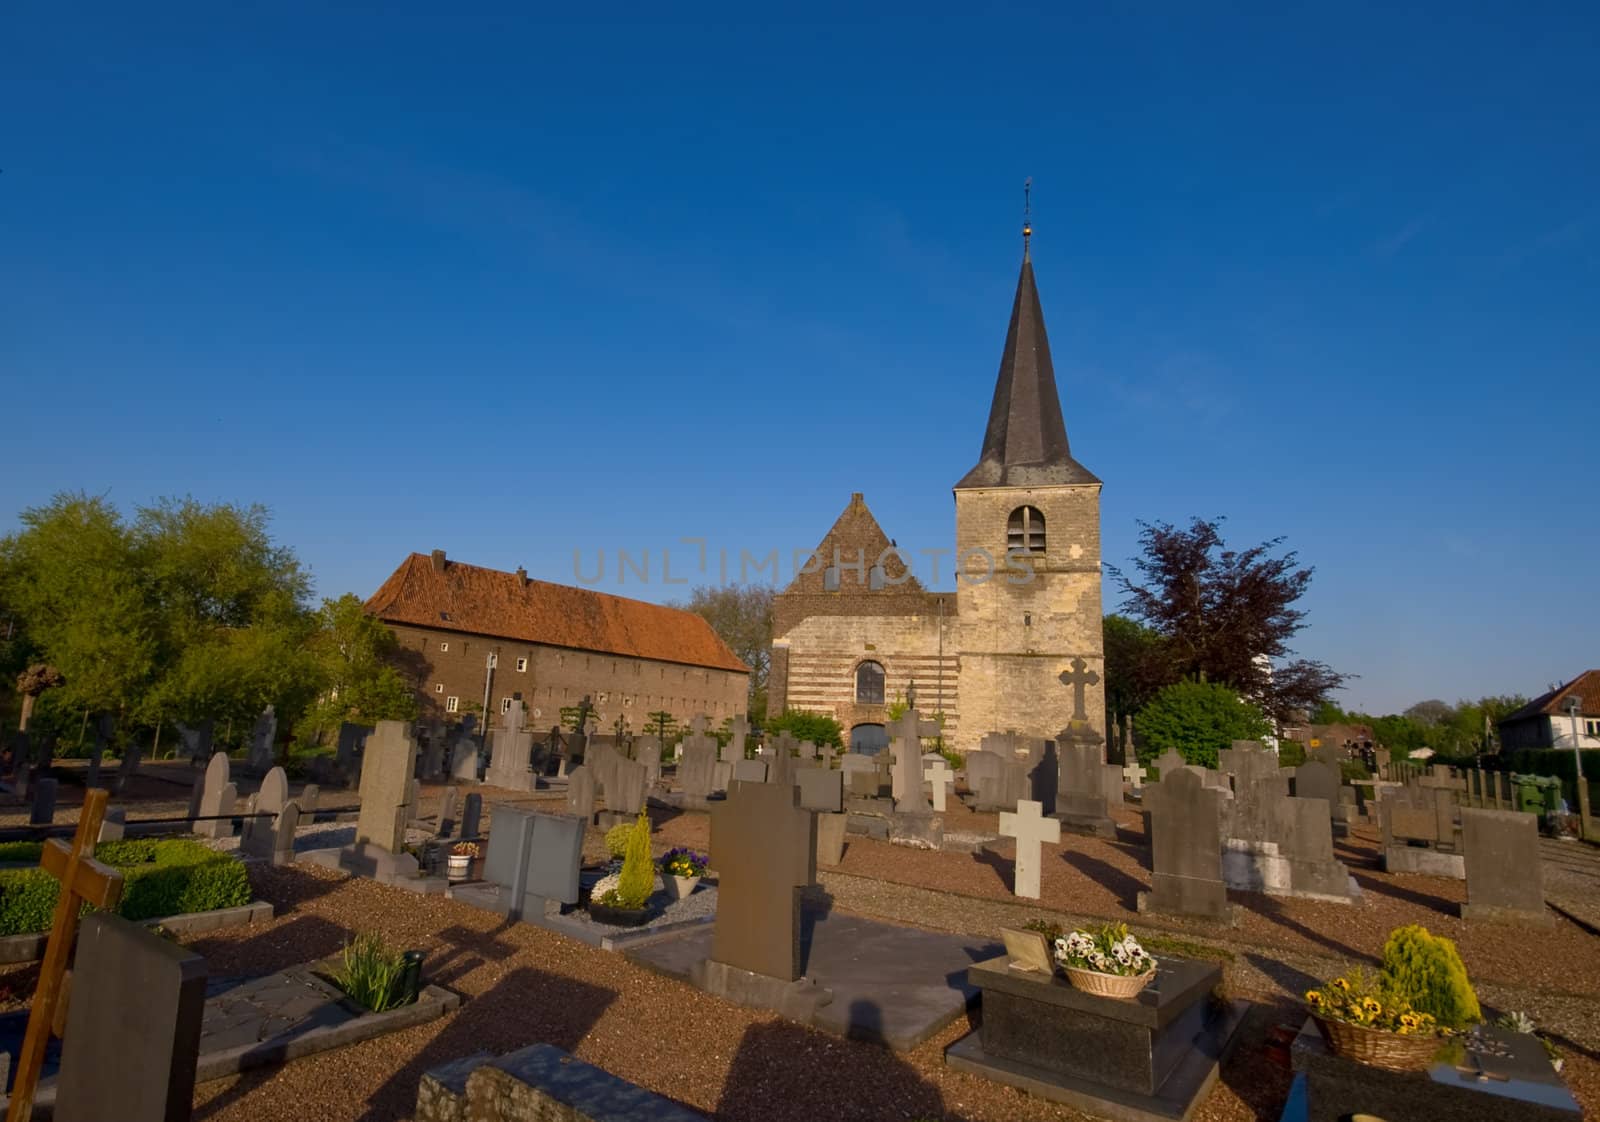 graveyard on a sunny day and blue sky with a little medieval church in the back
